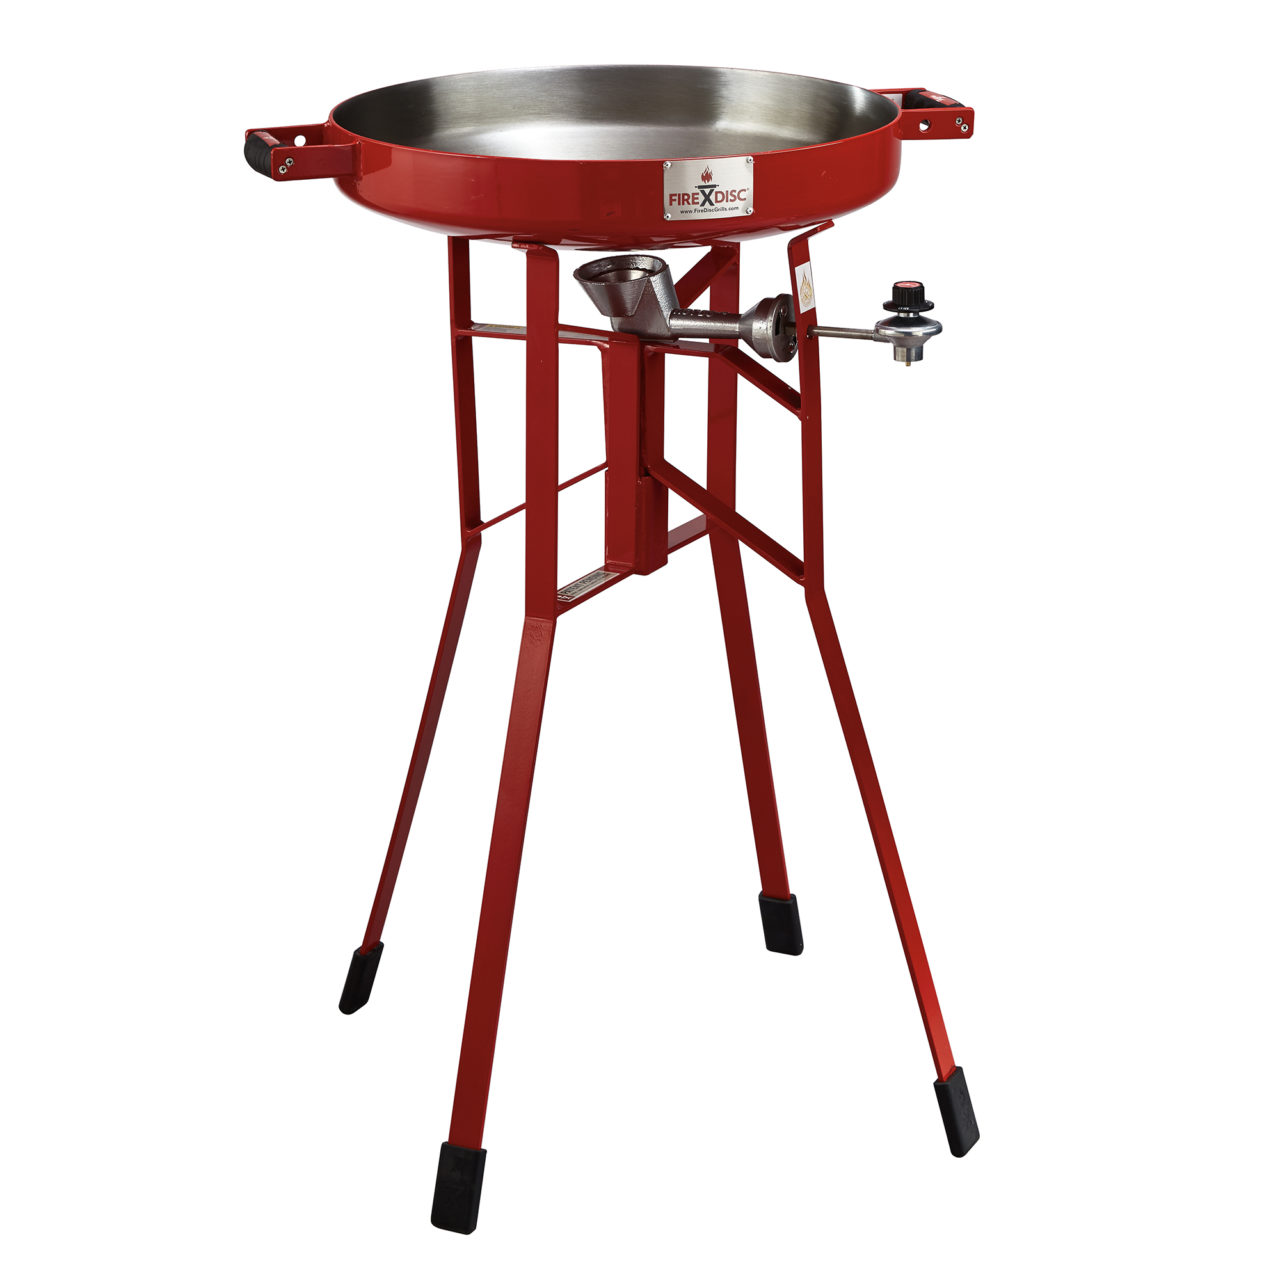 FireDisc® Cookers—Outdoor Cooking Excellence…with a Humanitarian Mission